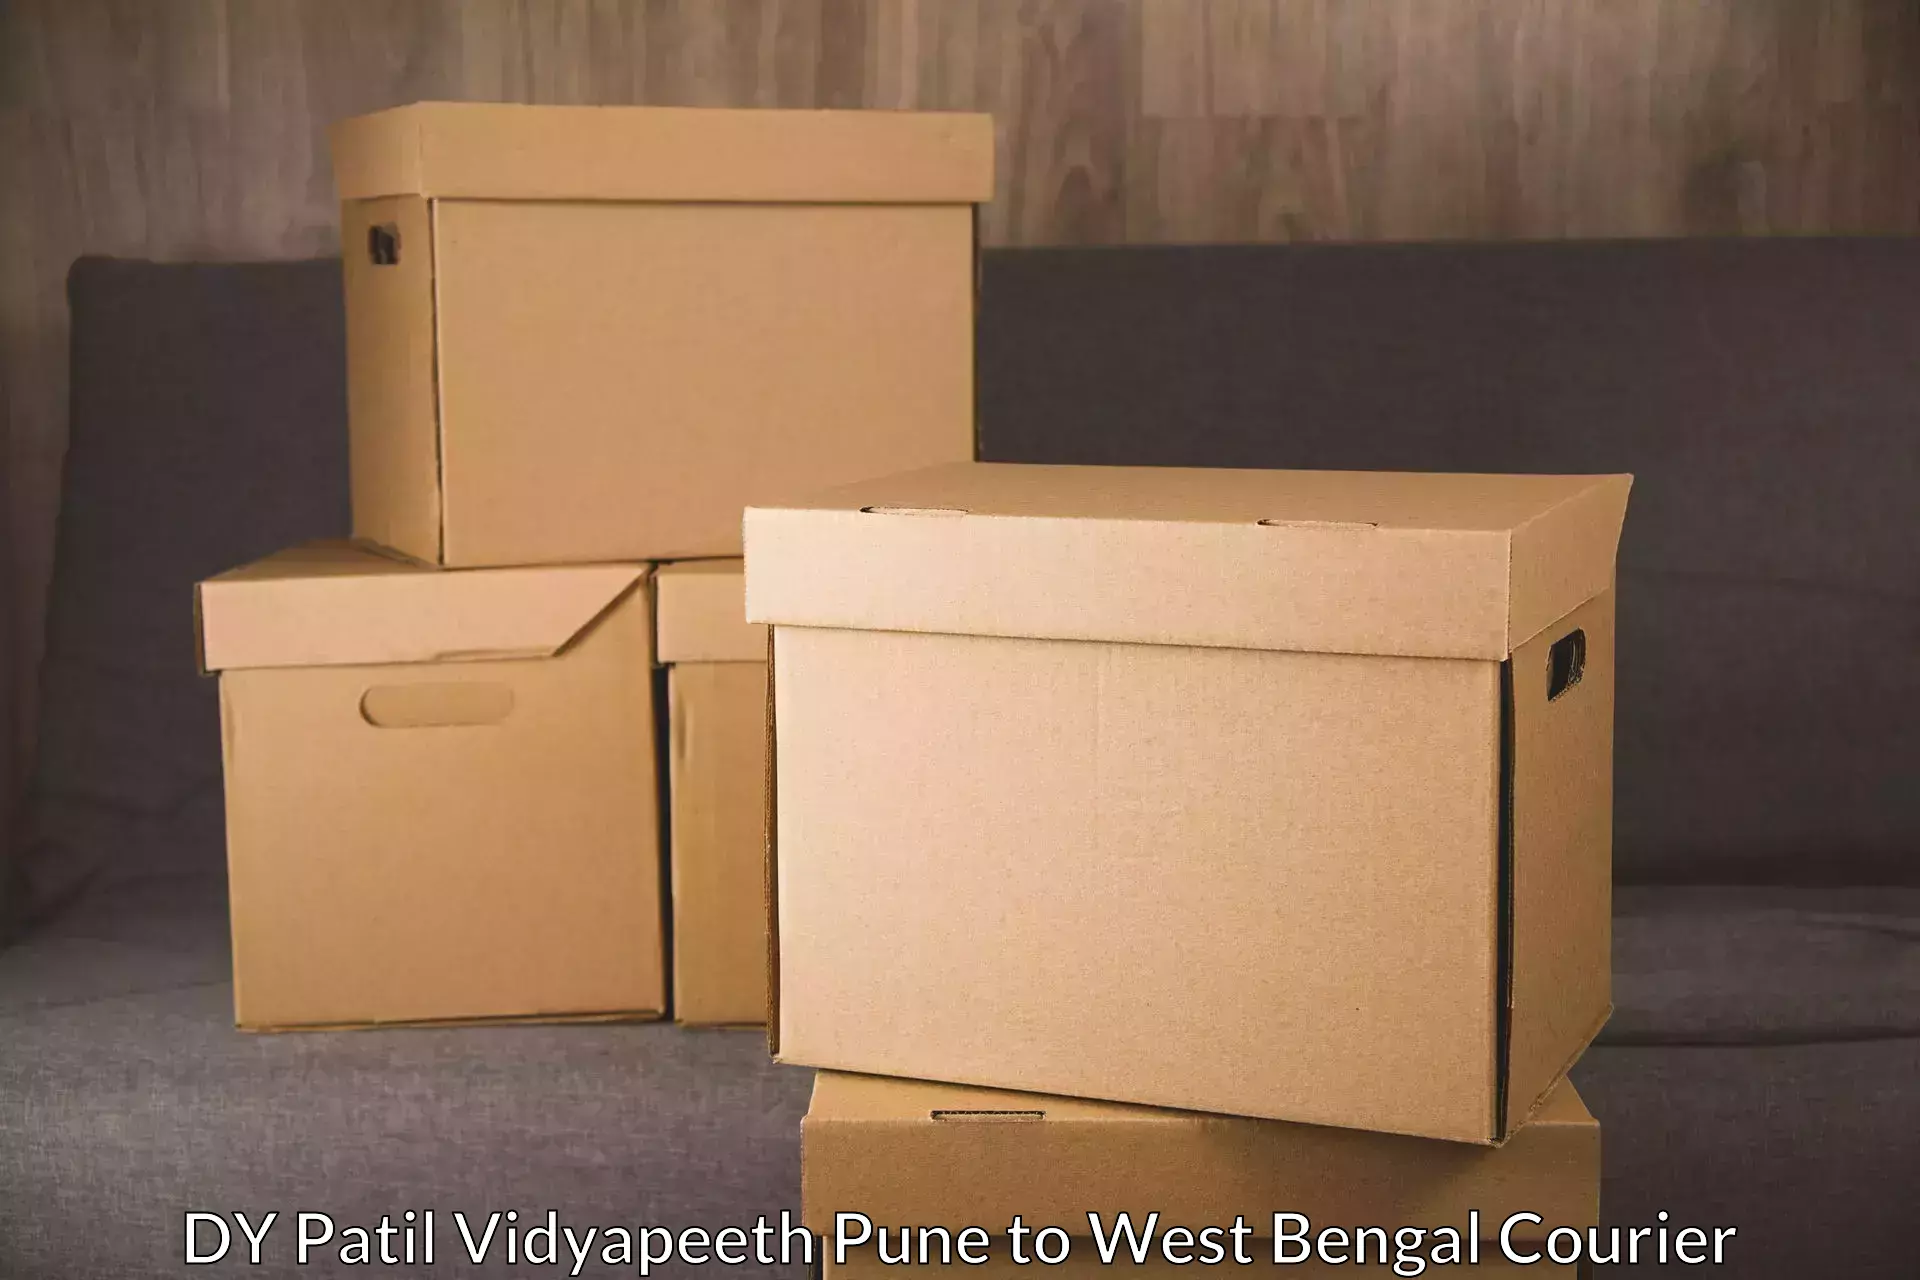 Reliable courier service DY Patil Vidyapeeth Pune to Kalchini